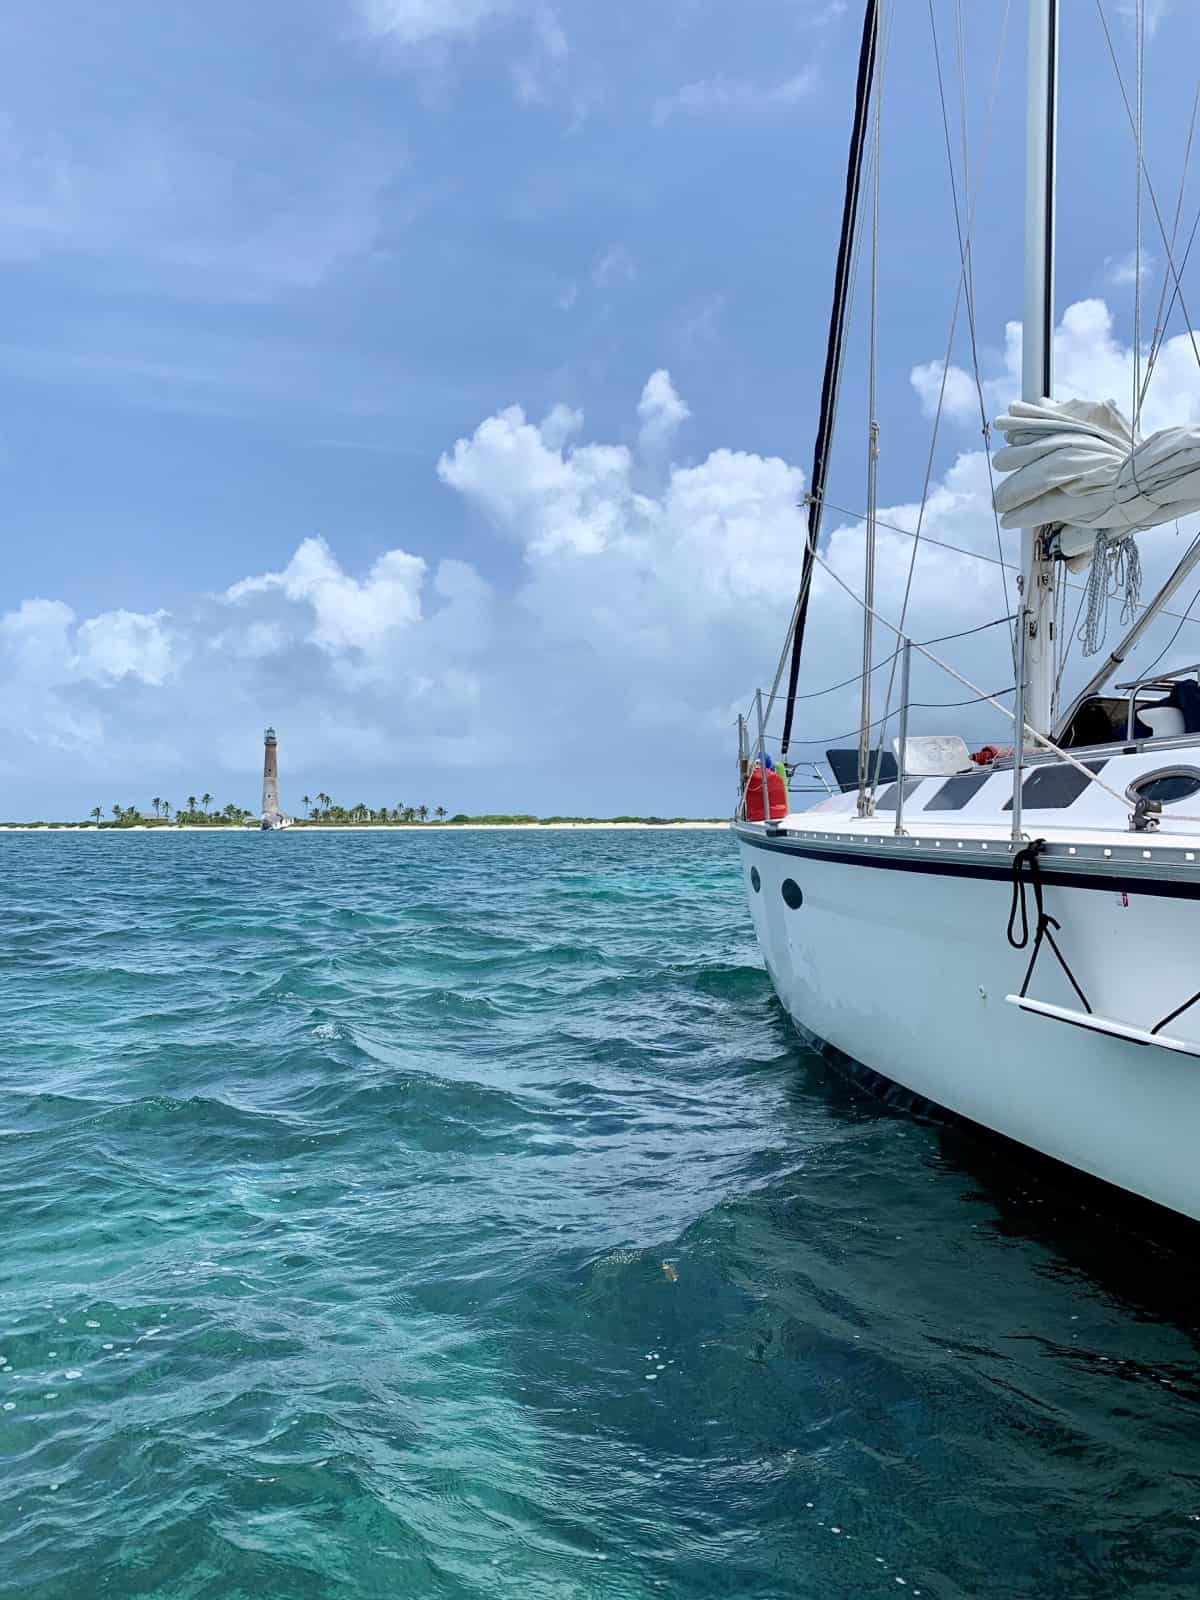 Visiting the Stunning, Remote Loggerhead Key in Dry Tortugas National Park (Florida, USA) | If you're visiting Dry Tortugas National Park, consider figuring out a way to see Loggerhead Key as well. I did a private sailboat charter down there, and had this gorgeous island all to myself. #drytortugas #keywest #nps #nationalpark #loggerhead